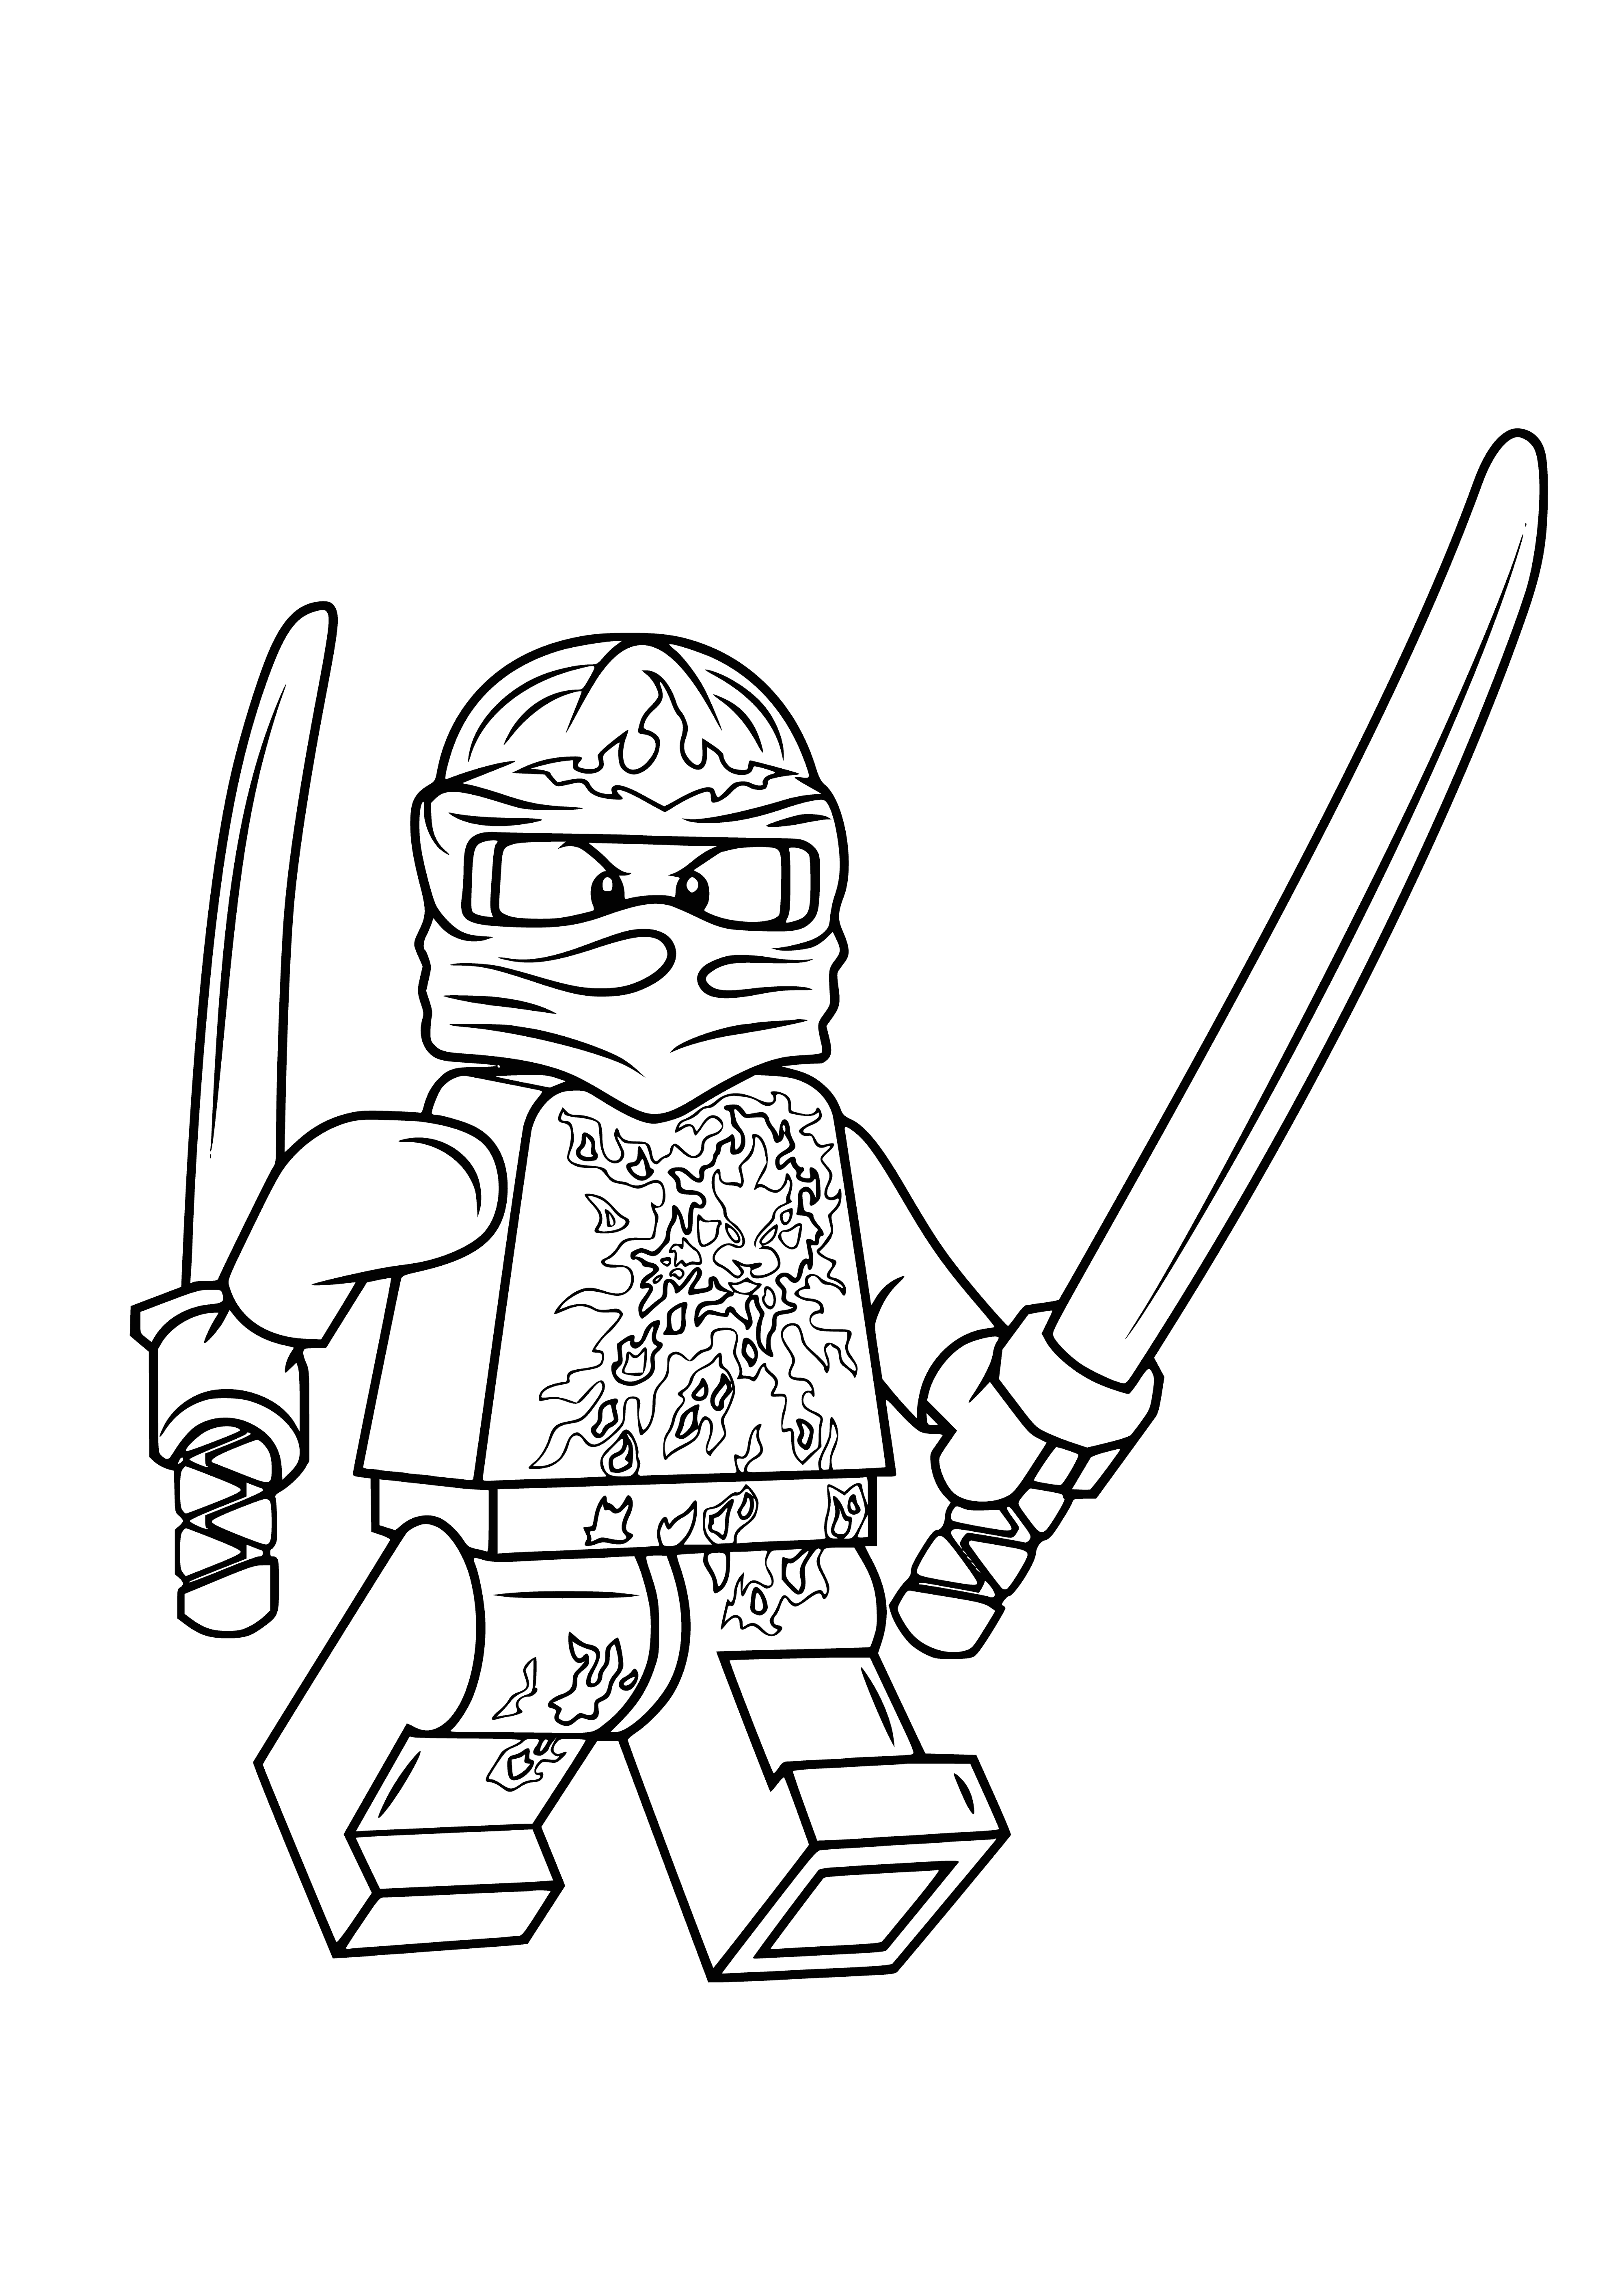 coloring page: Assemble a plastic toy Lego Ninjago - Kai Nrg with a red, blue & yellow ninja on the front. "Ninjago" is printed on the bottom.